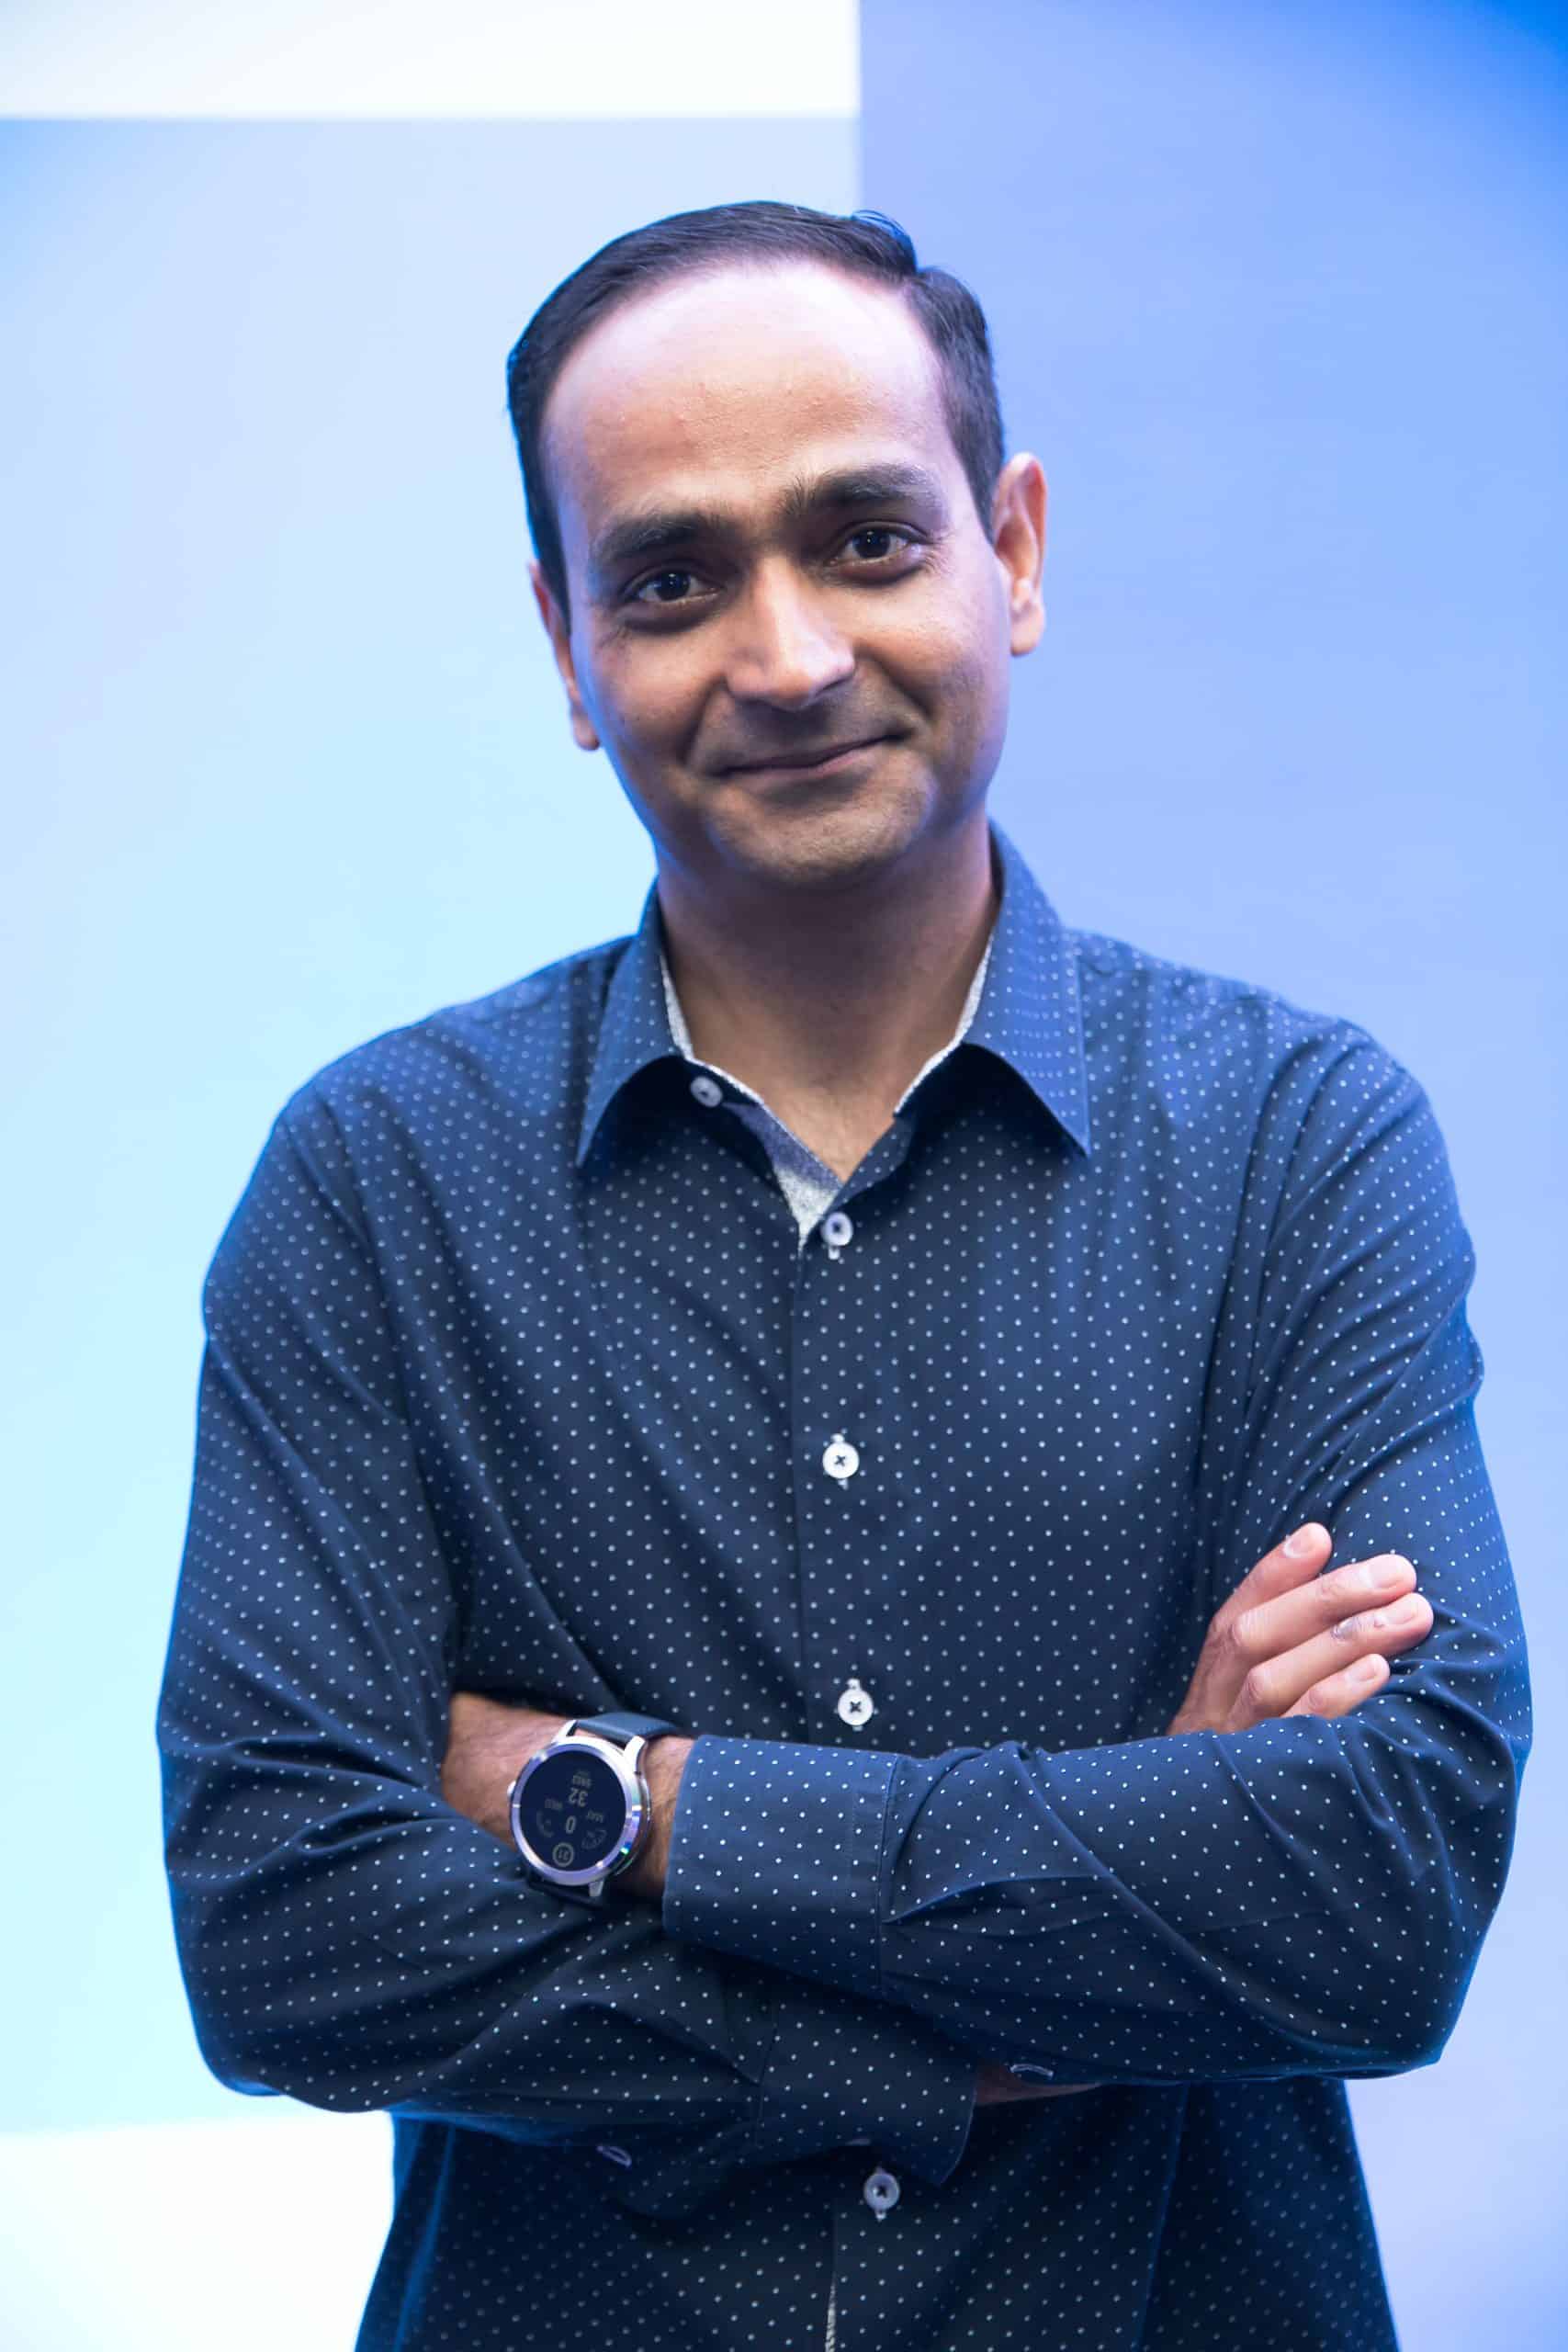 Avinash Kaushik is a respected voice in the marketing world with good reason.